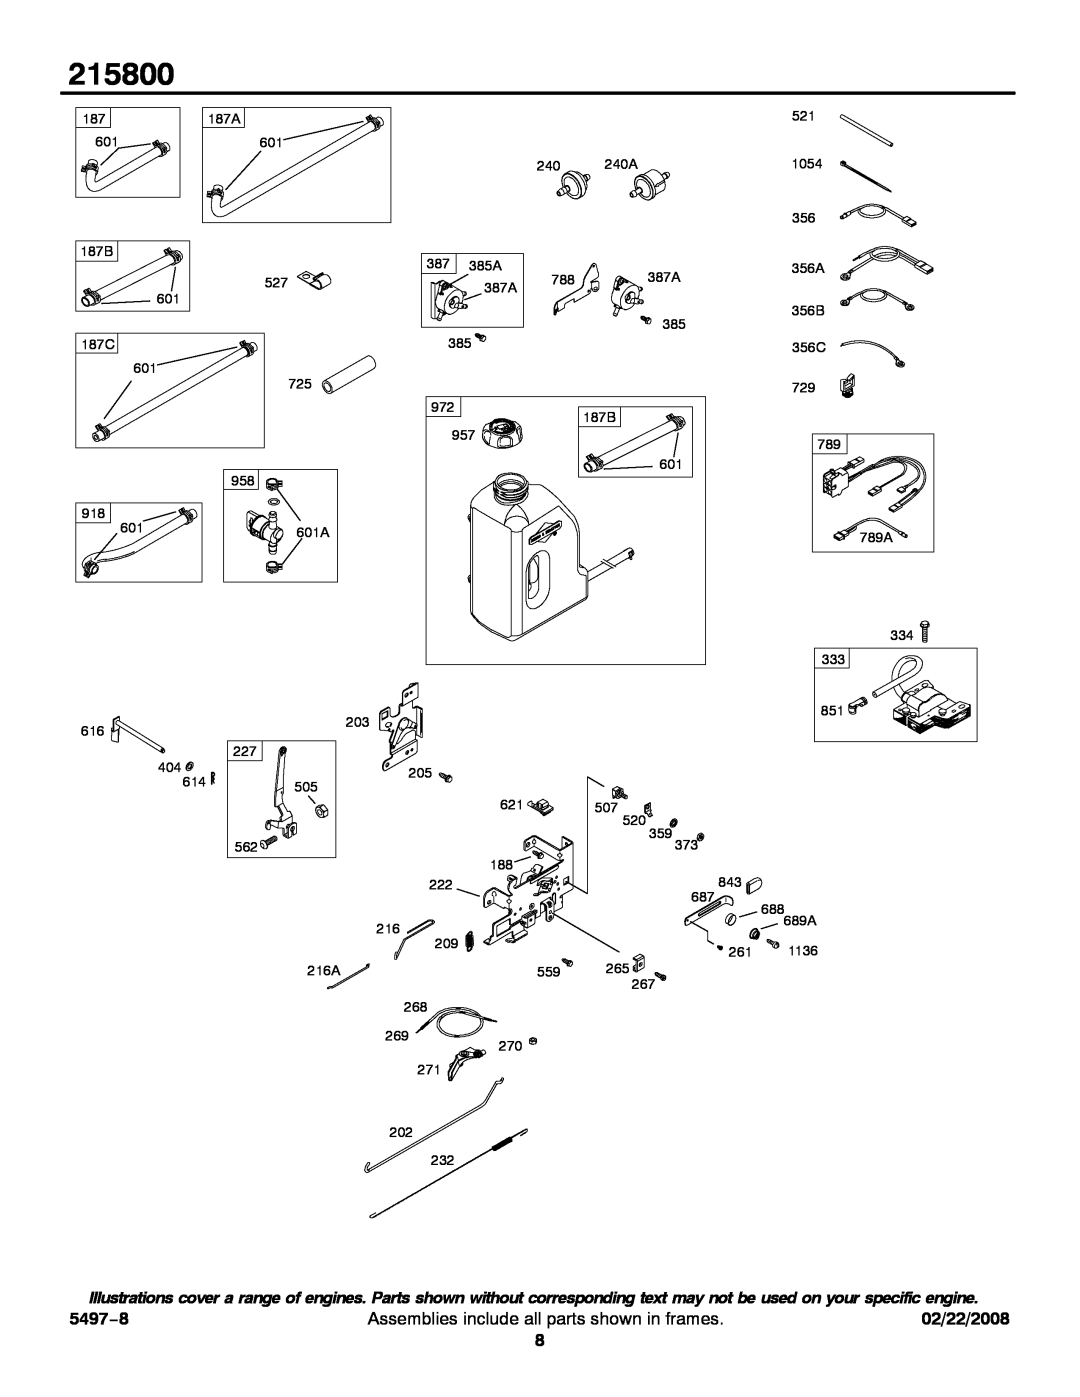 Briggs & Stratton 215800 service manual 5497−8, Assemblies include all parts shown in frames 